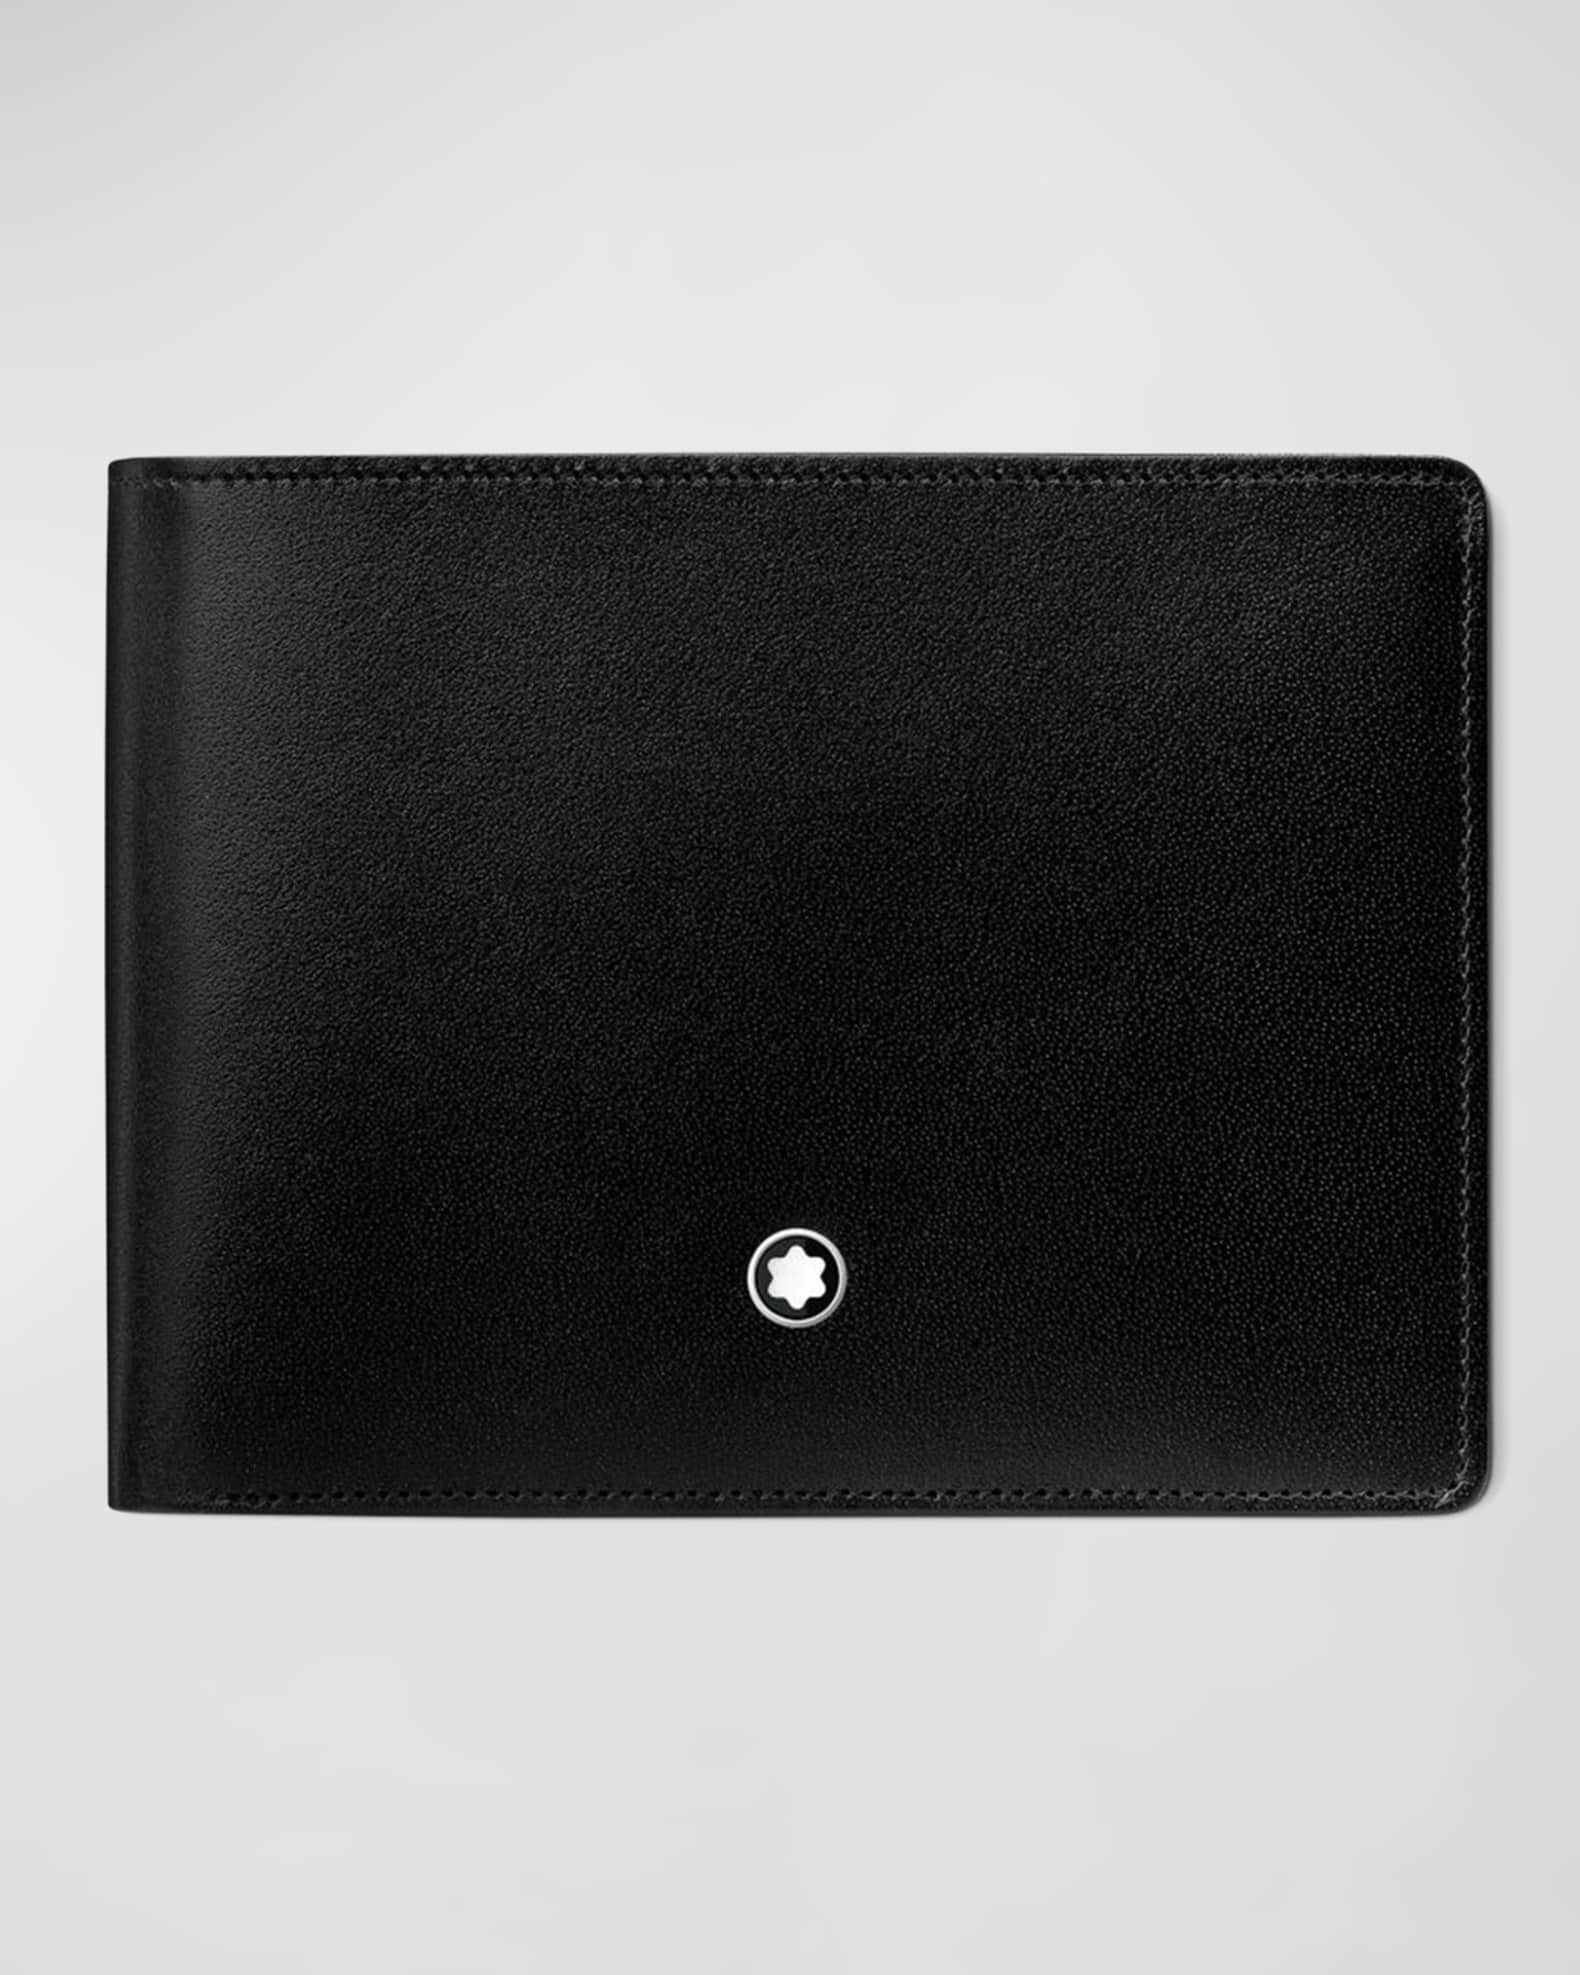 Montblanc Extreme 3.0 Wallet 6cc With Money Clip In Black